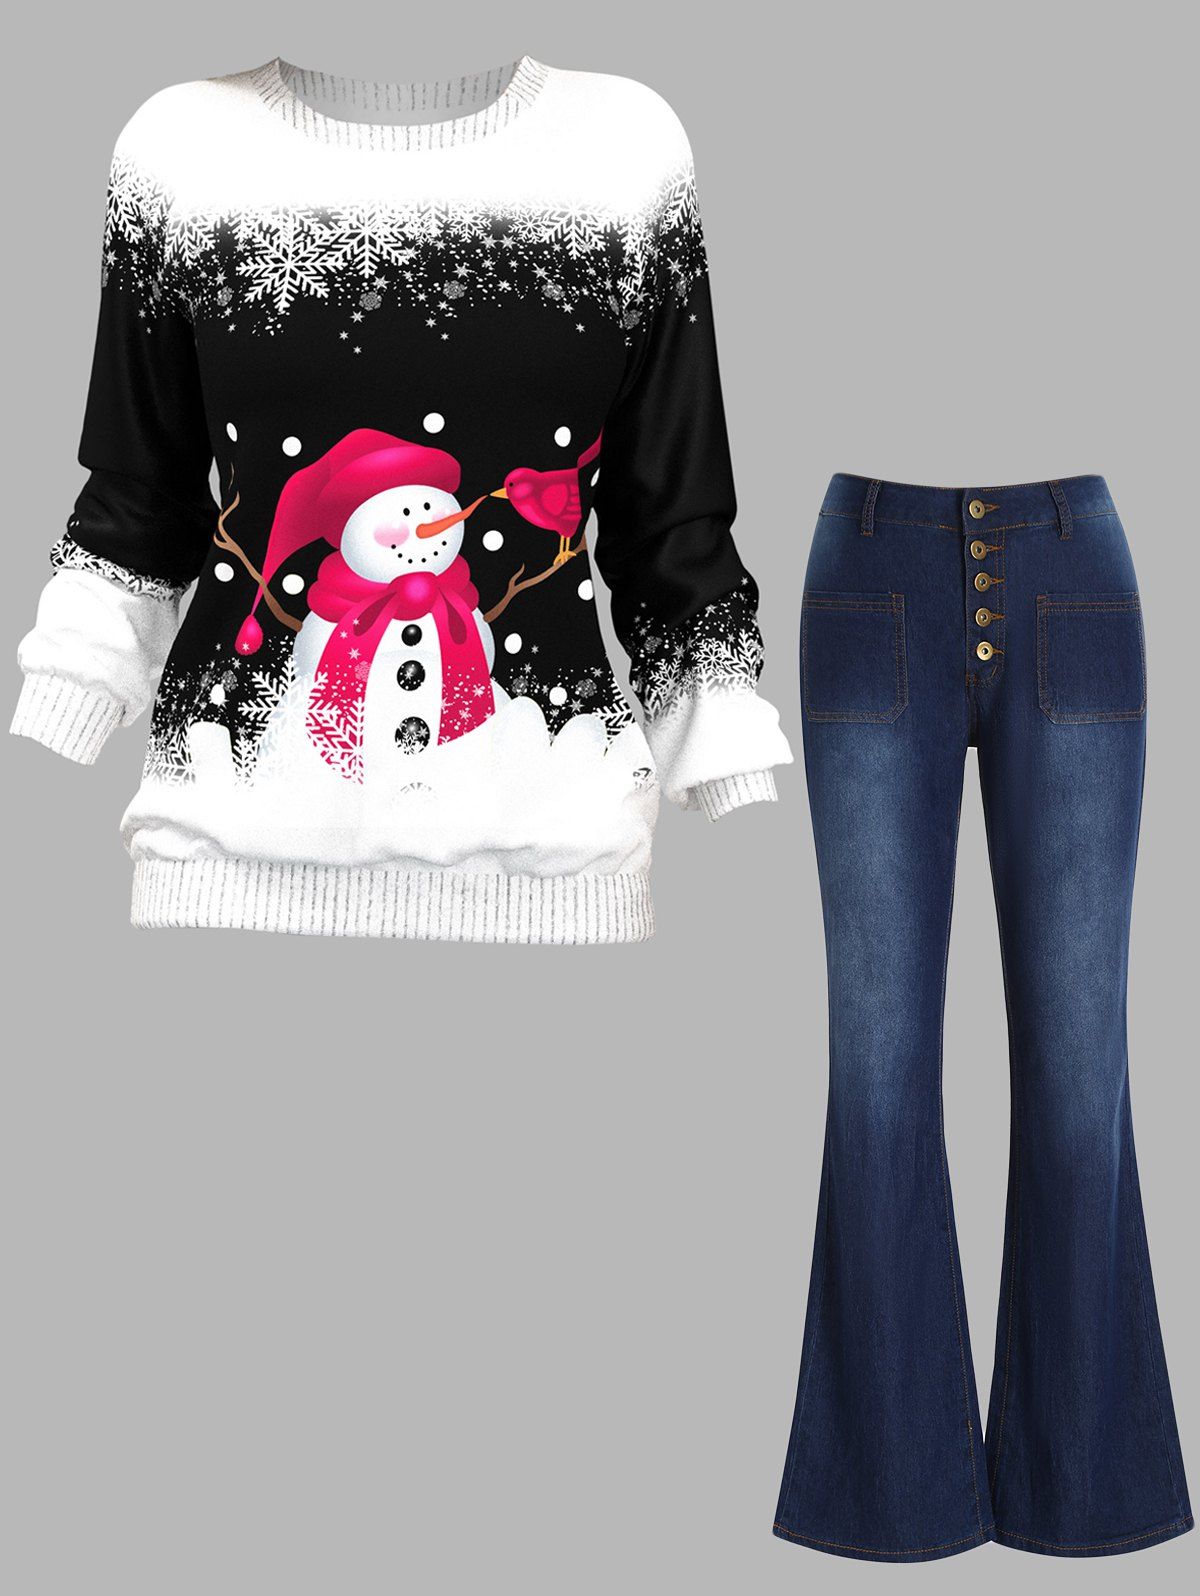 Snowman Snowflake Print Raglan Sleeve Sweatshirt And Button Fly Patch Pockets Flare Jeans Christmas Outfit - multicolor M